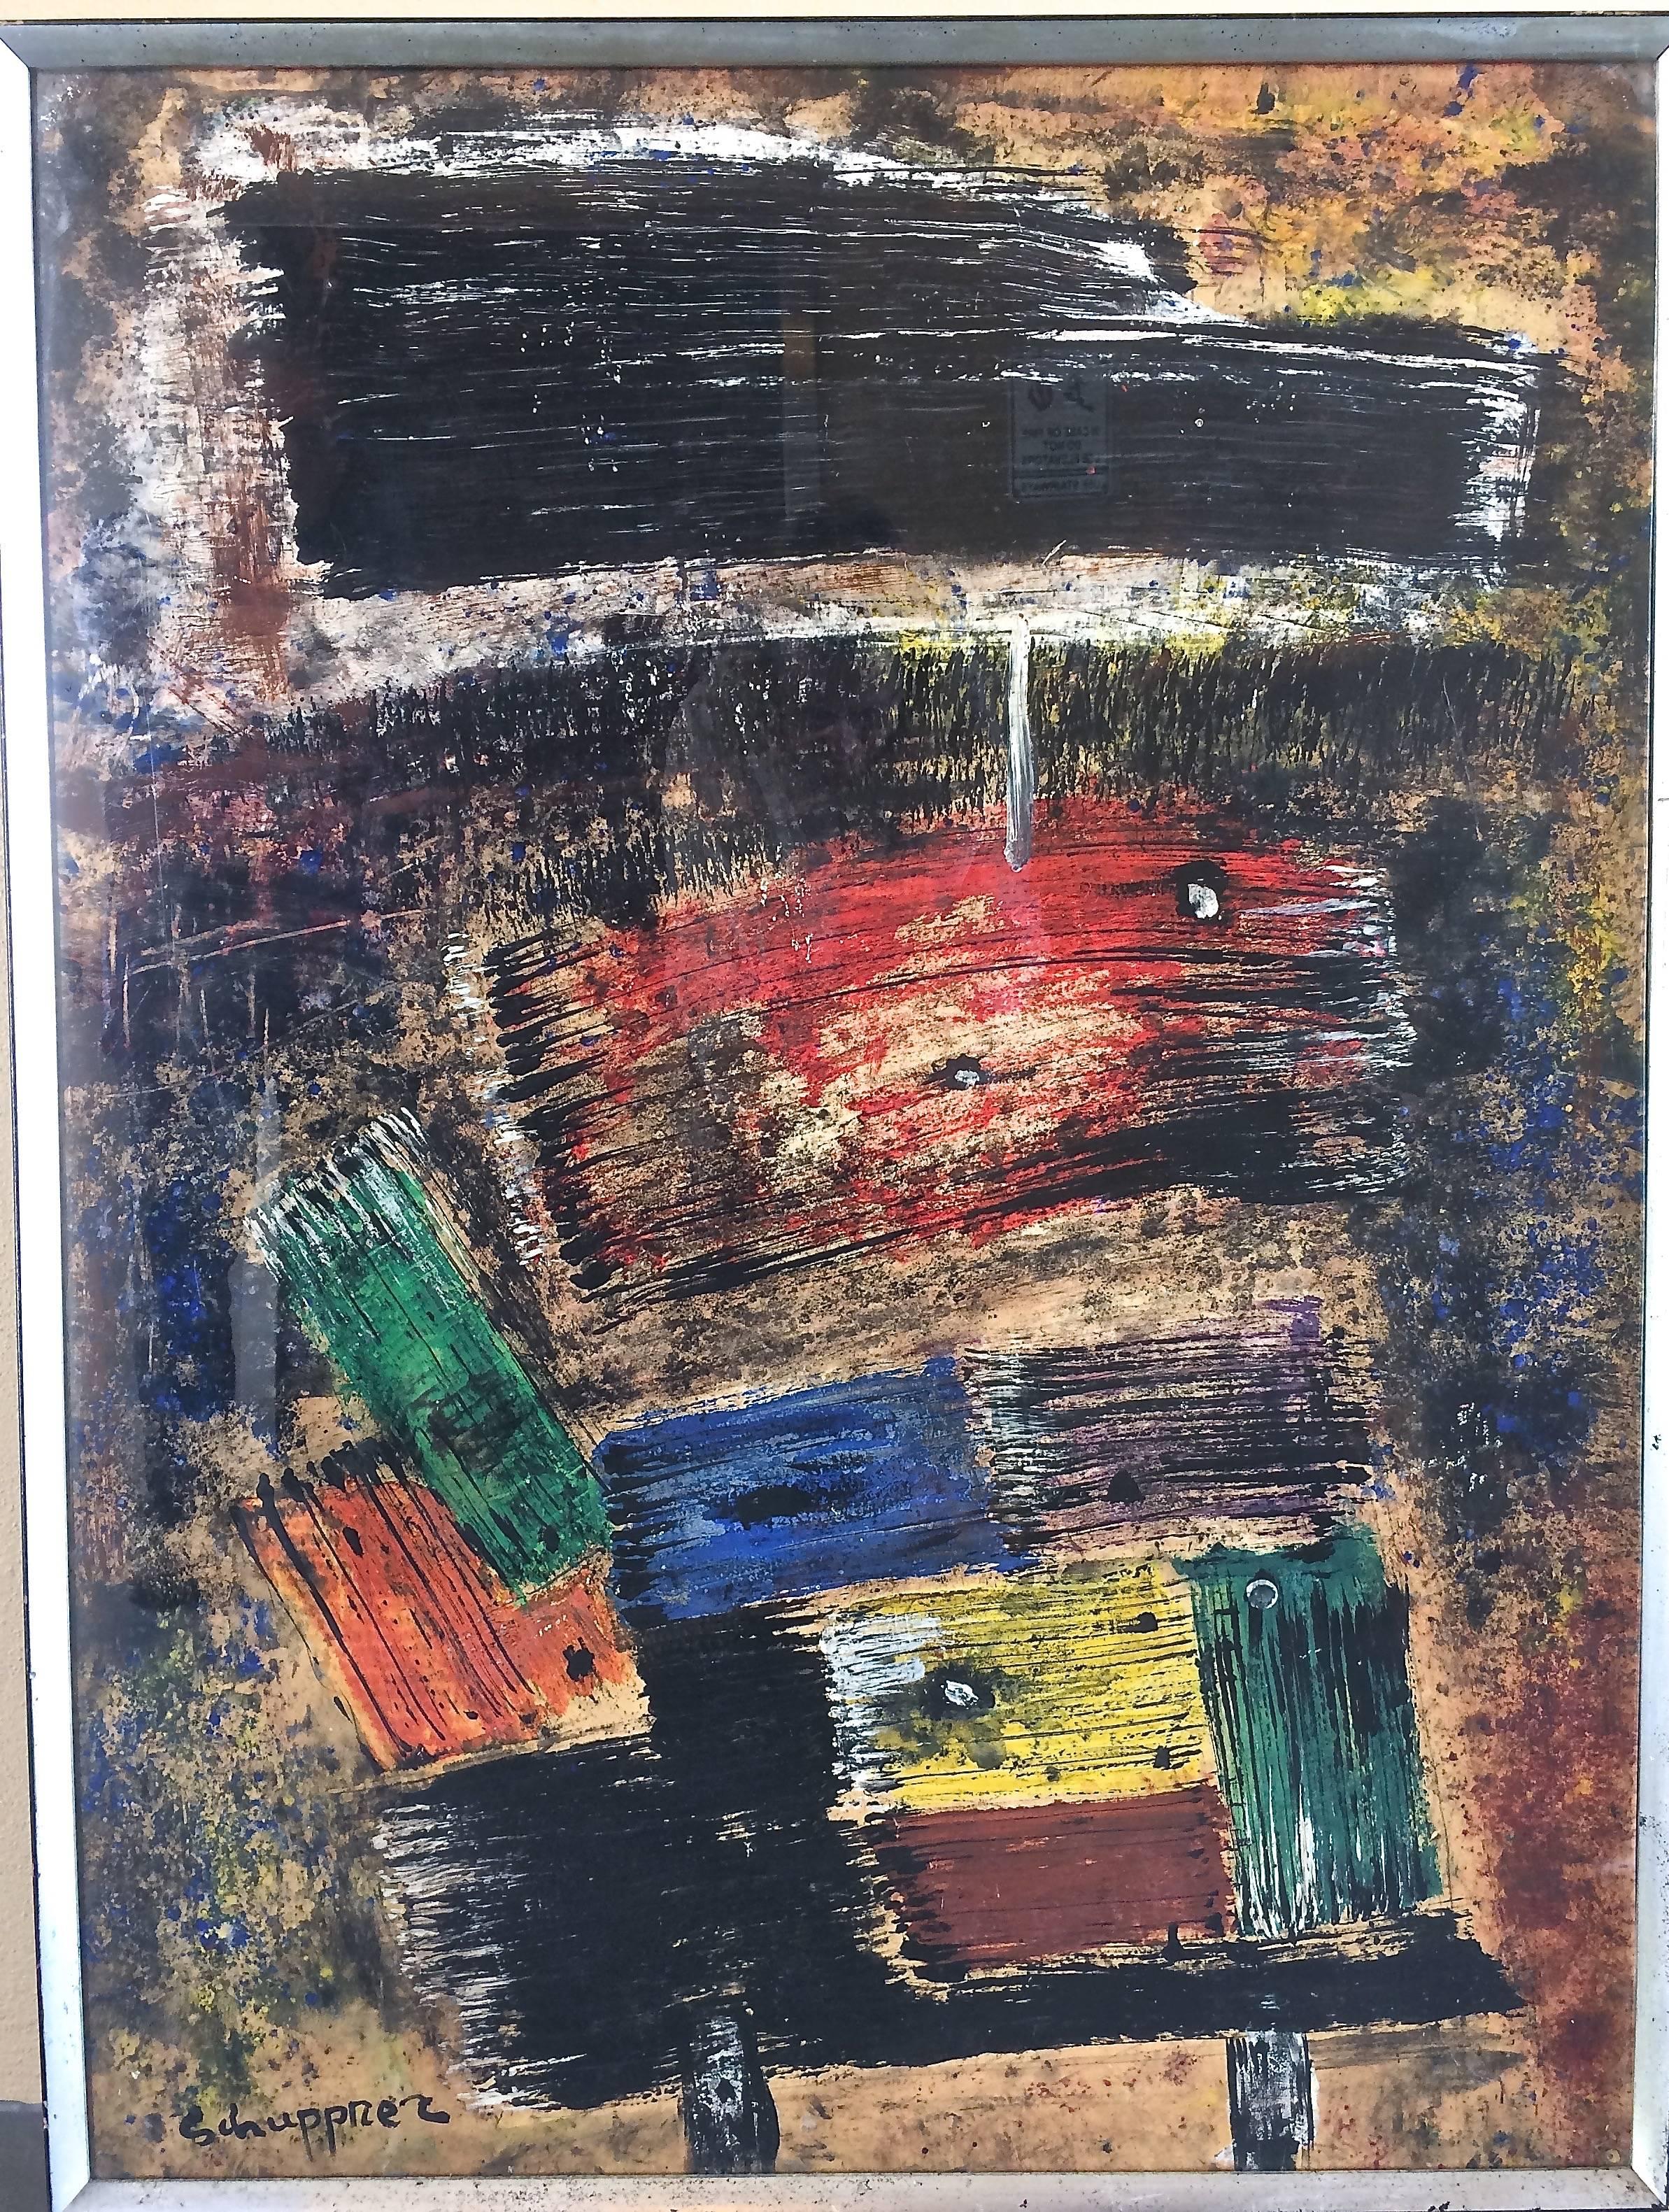  Abstract Composition Work On Paper - Painting by Robert Shuppner-Hamm